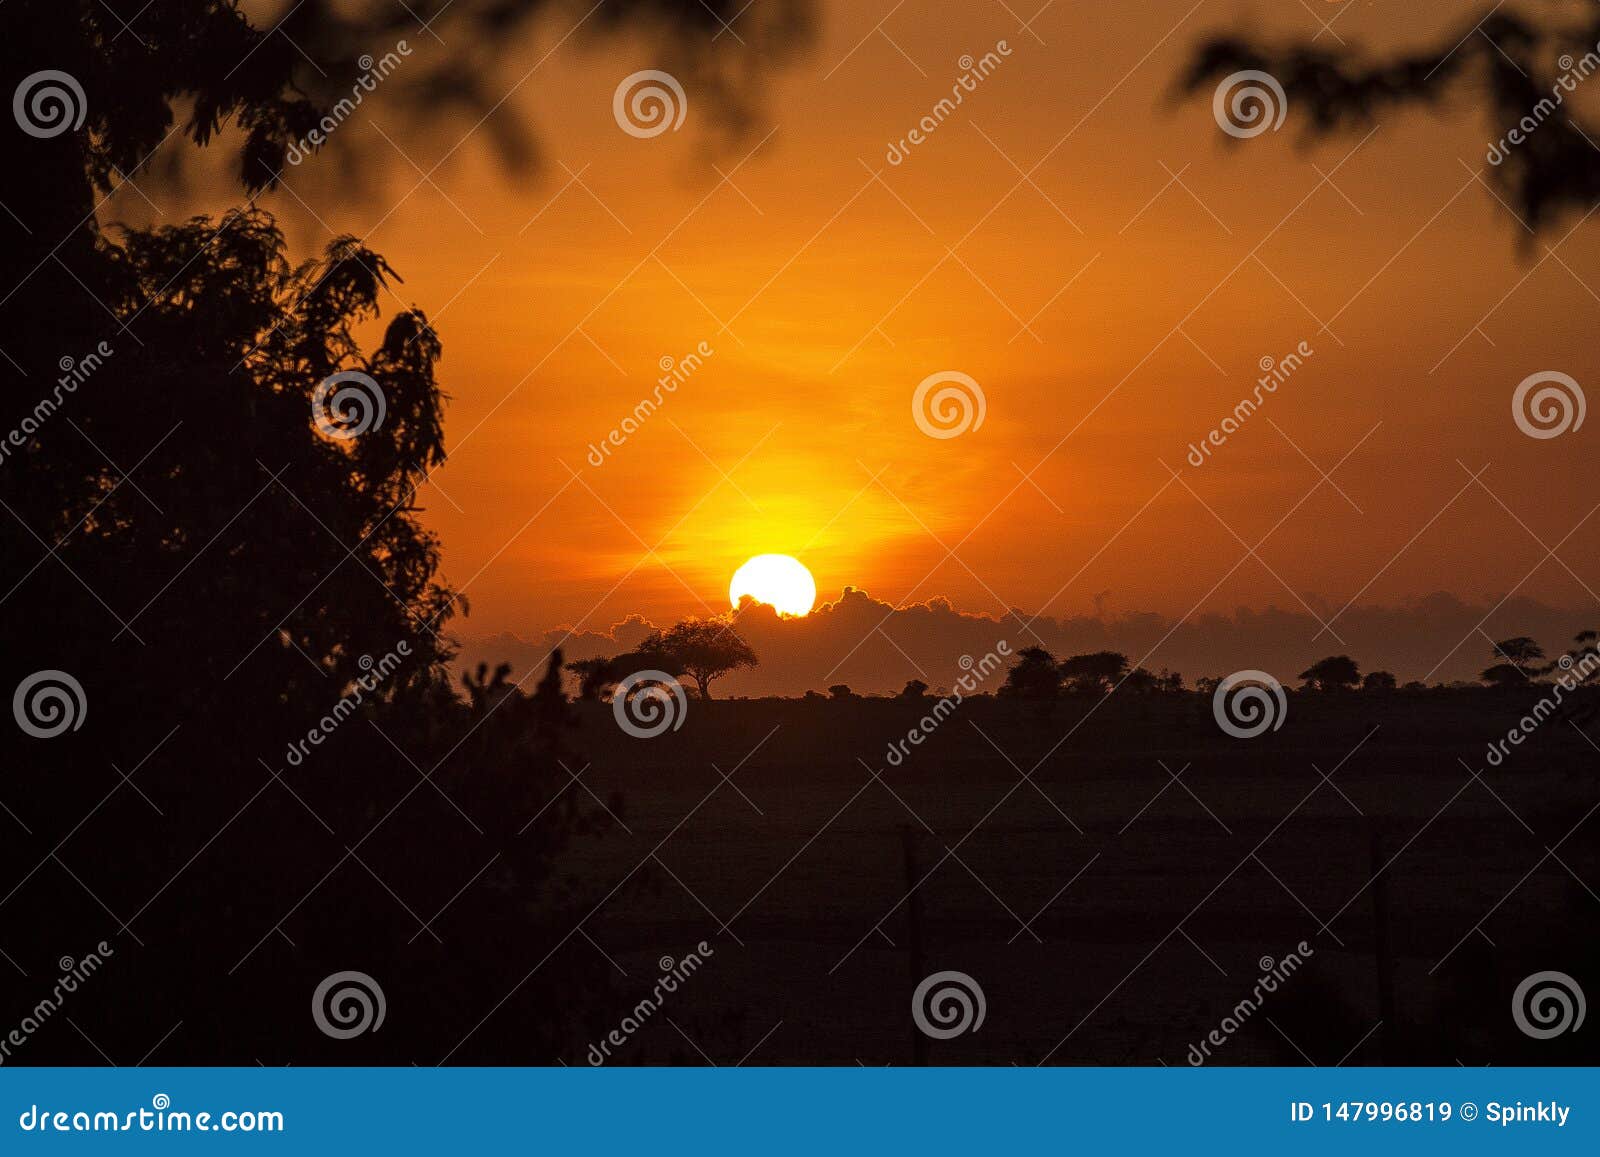 Beautiful Sunset Landscape For Wallpaper Stock Image Image Of